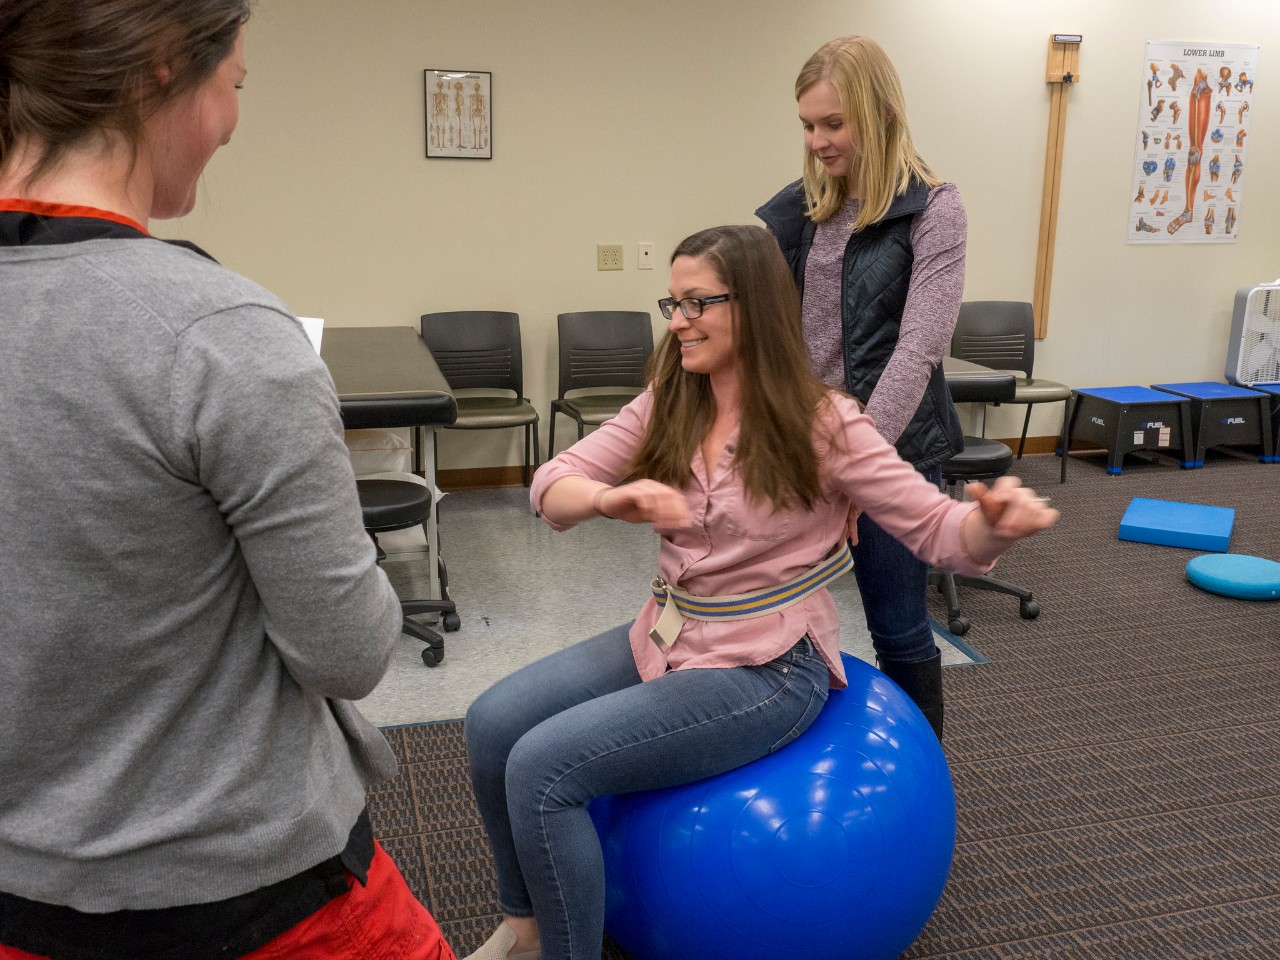 Two students learn physical therapy technique with a student seated on an exercise ball.